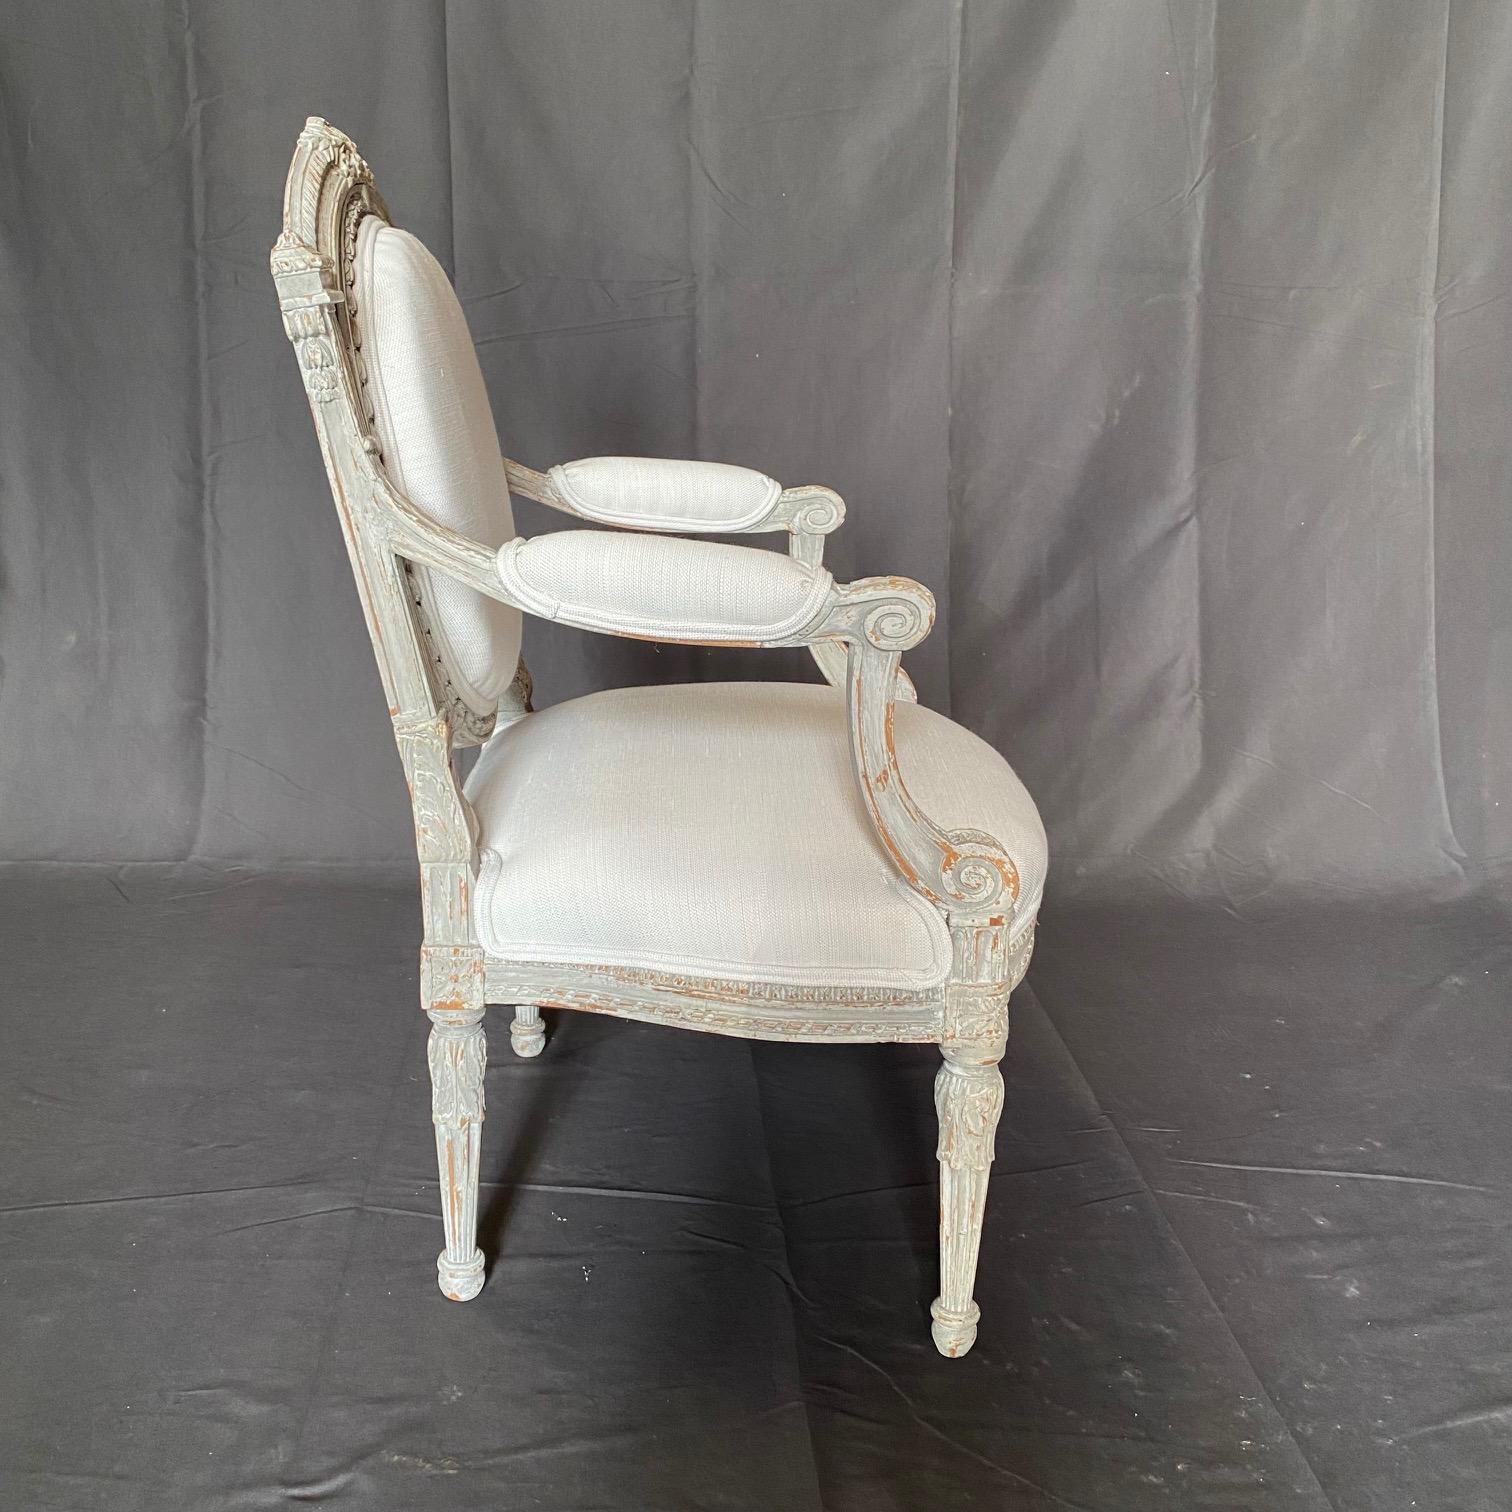 French Early 19th Century Stunningly Carved Louis XVI Chair with Original Paint For Sale 2